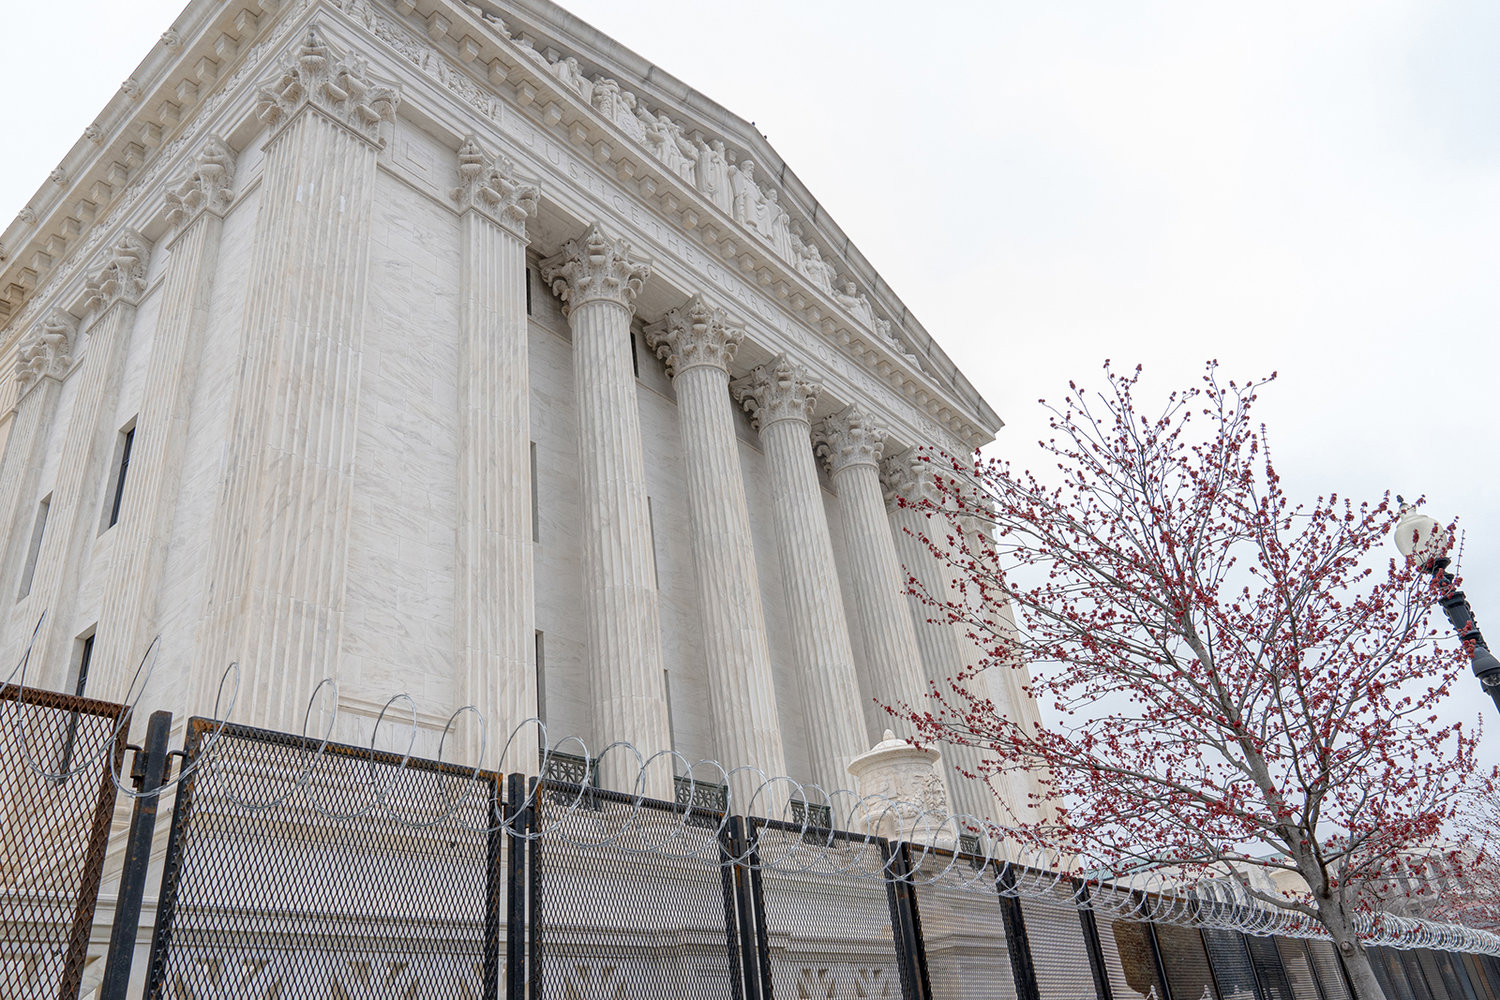 A tree blooms around a barbed wire fence behind U.S. Supreme Court Building on March 17, 2021, in Washington, D.C. (Mihoko Owada/Sipa USA/TNS)